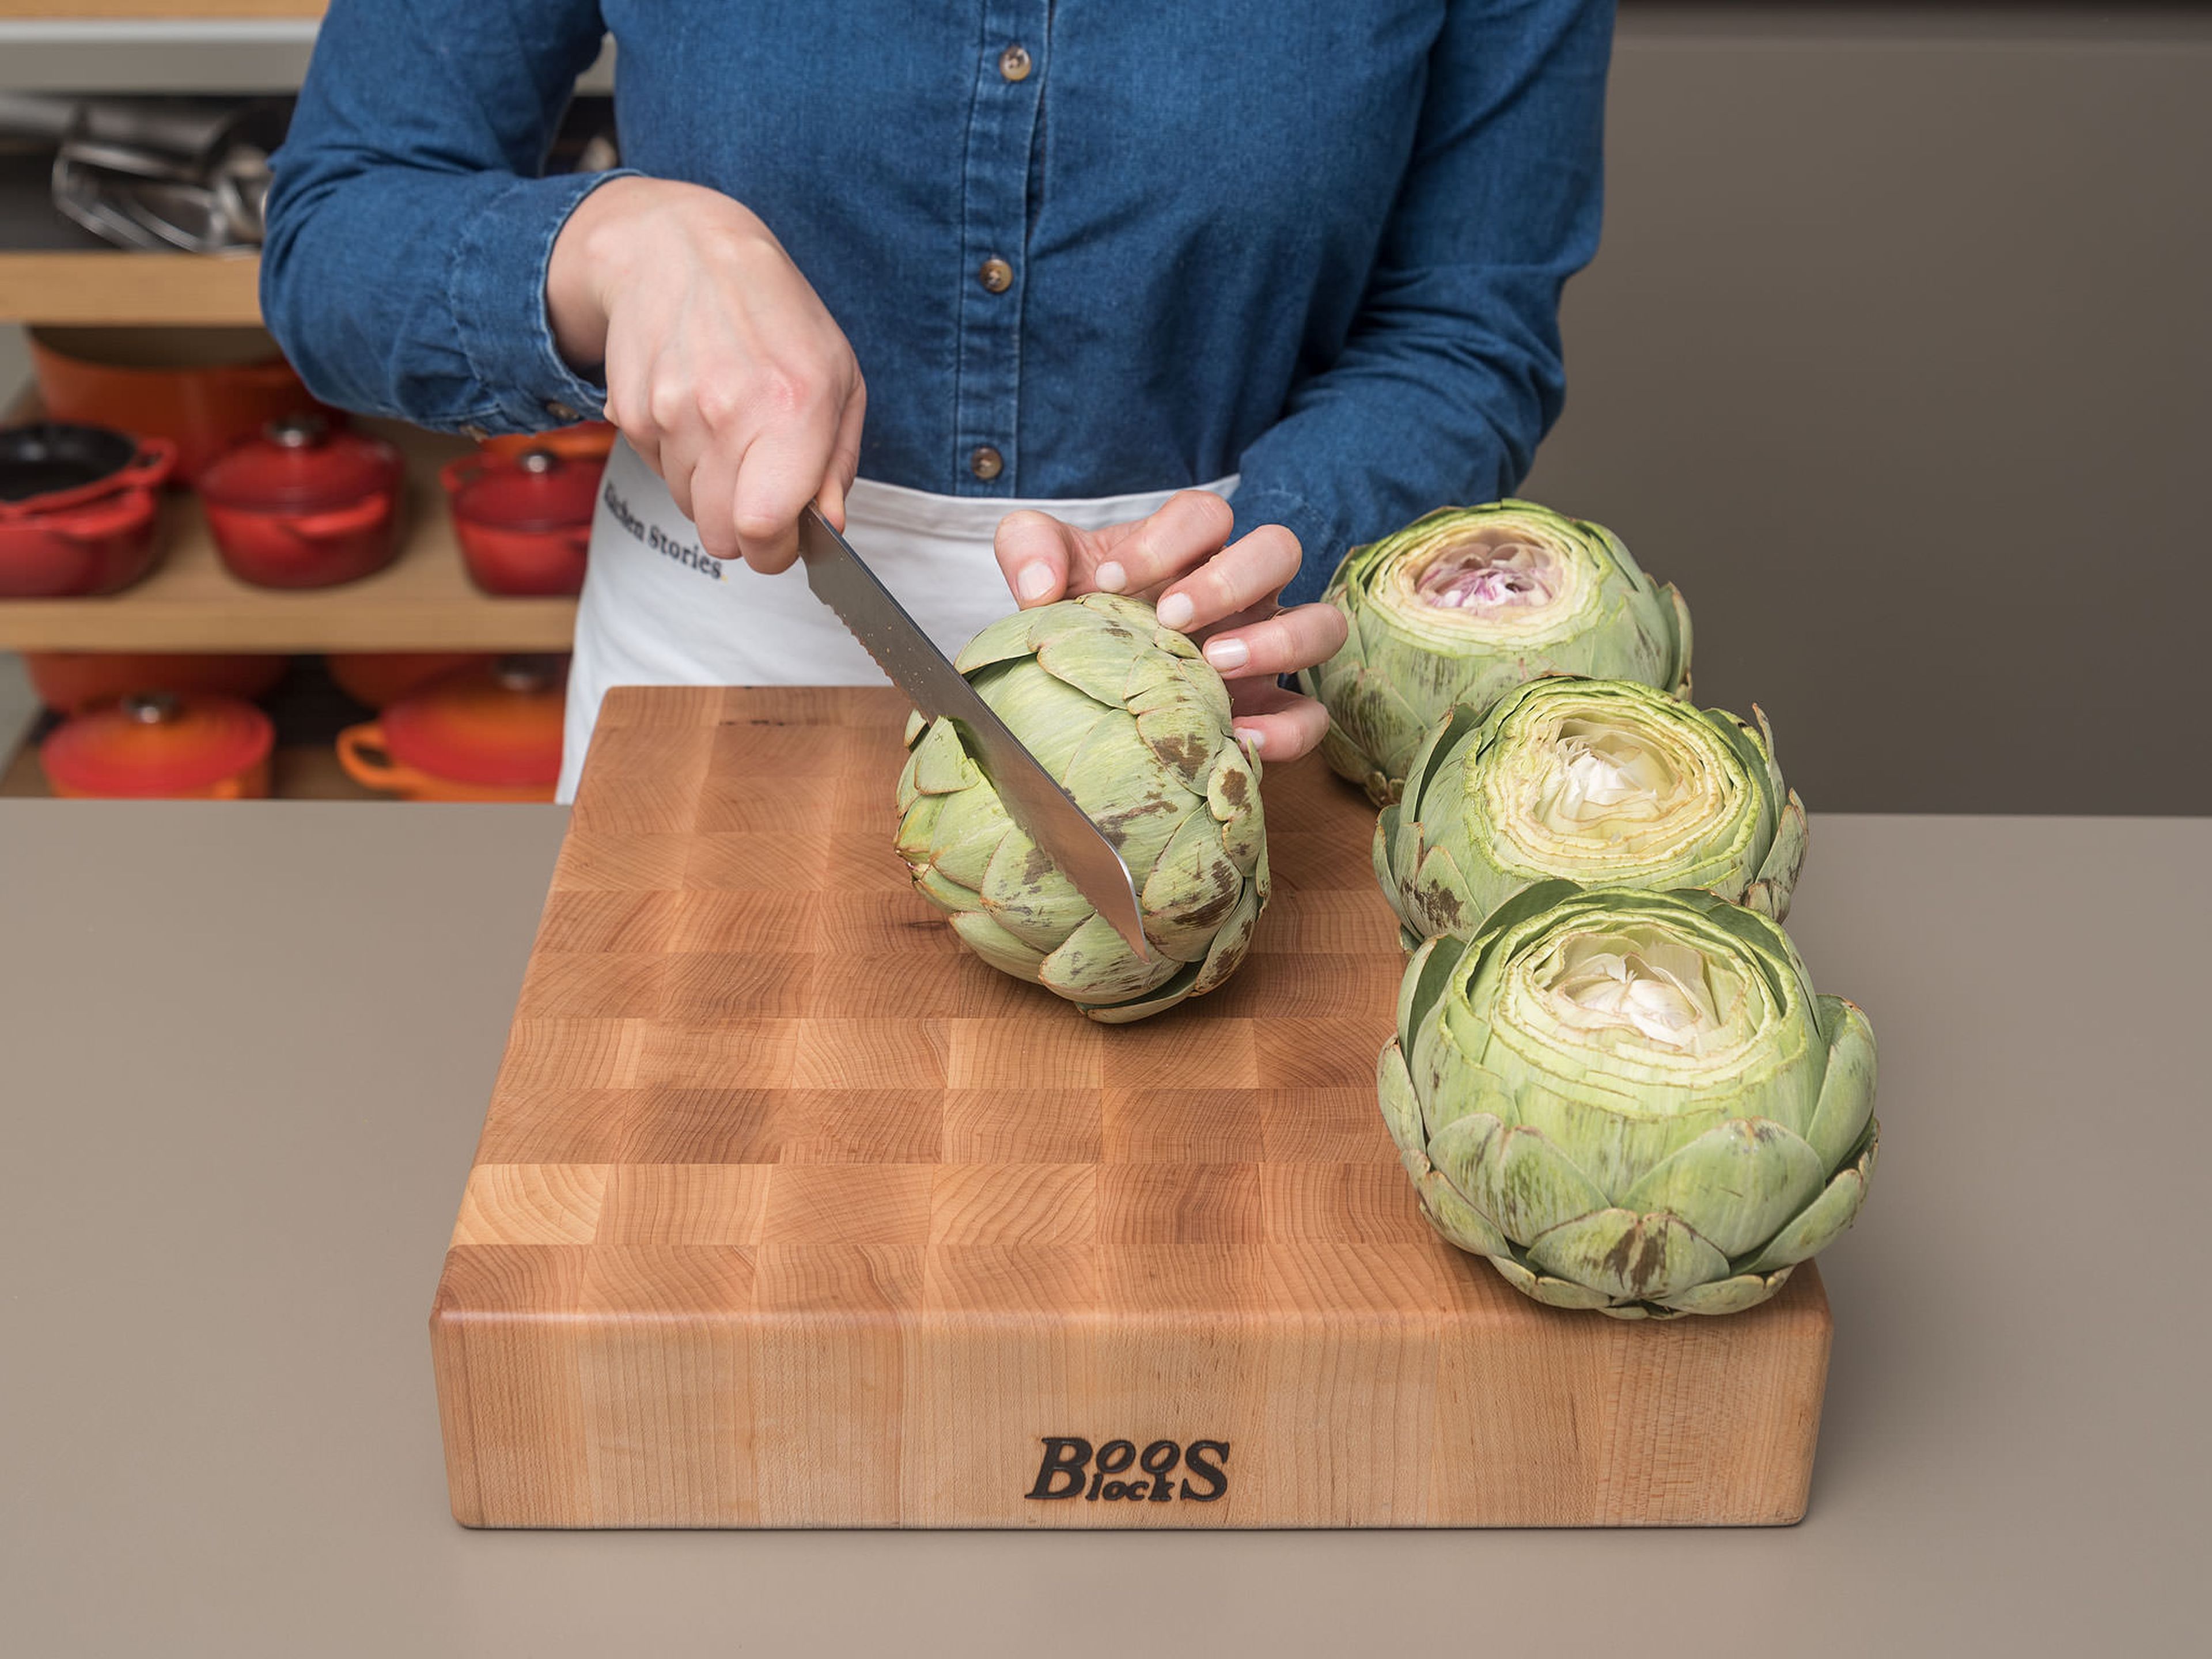 Preheat oven to 260°C/500°F. Cut off stems and top one-third of the artichokes. Gently pull leaves apart to open up the artichokes. Peel and crush garlic. Transfer artichokes to a large baking dish.